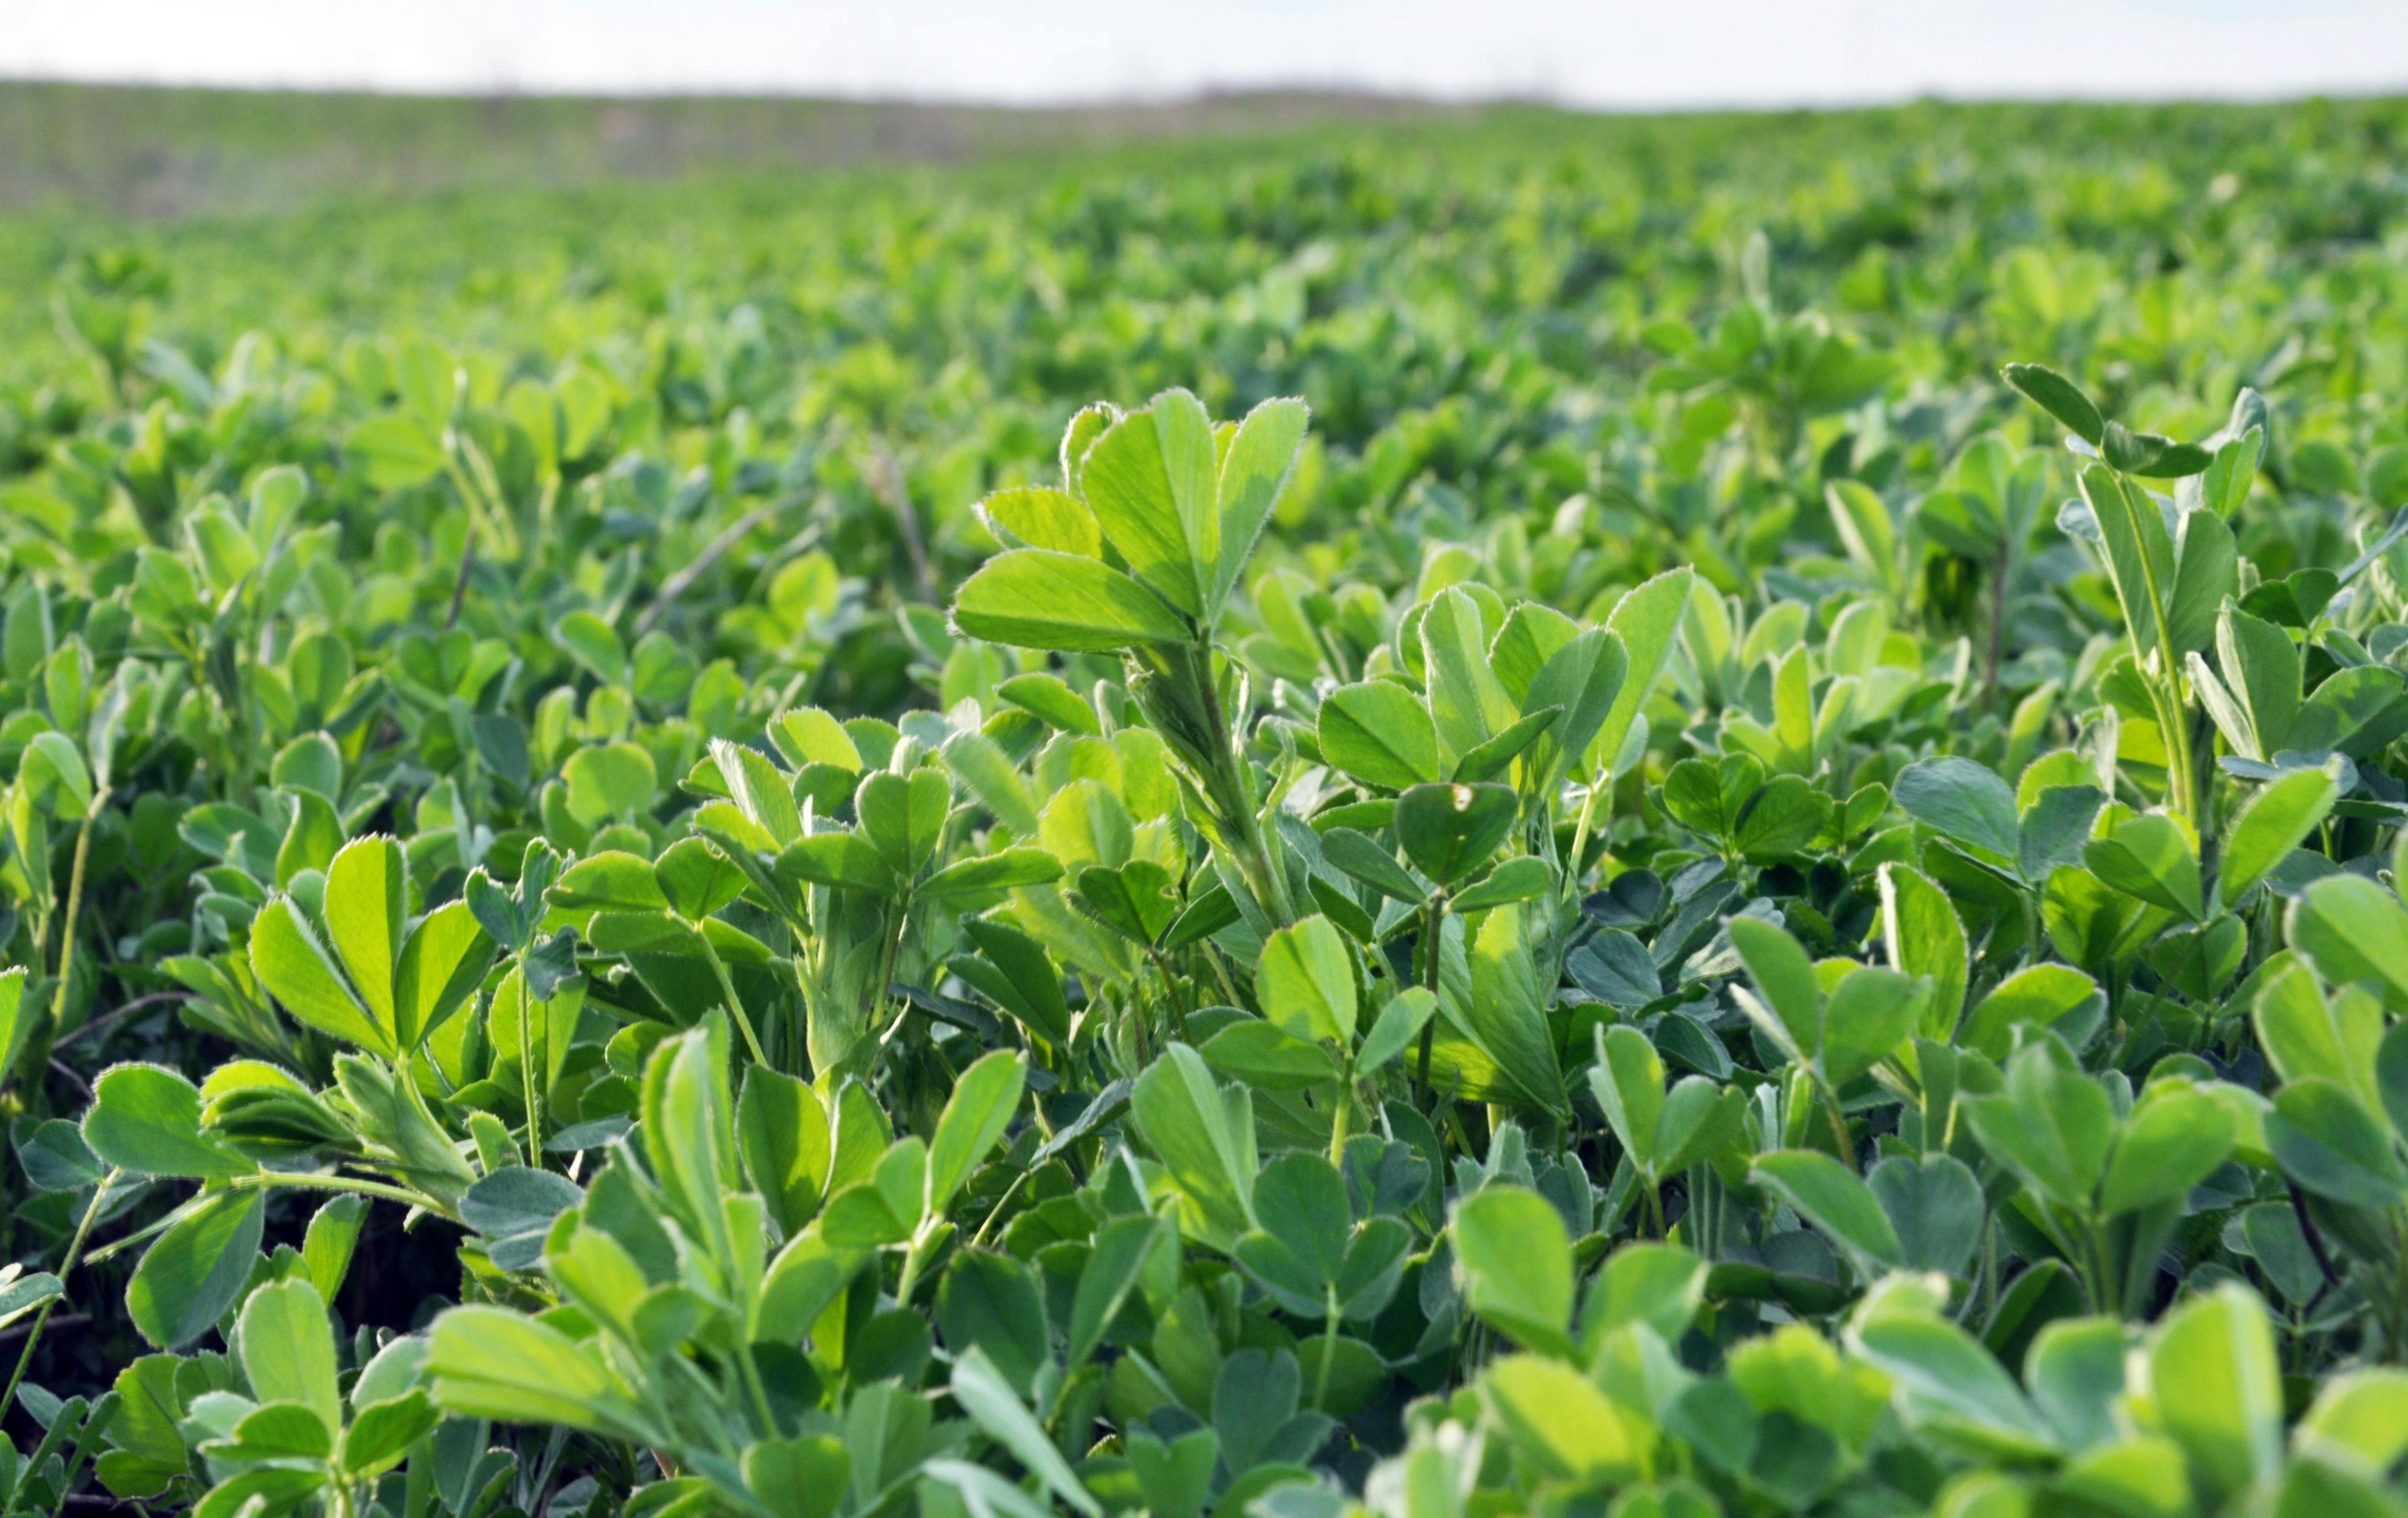 In the spring field young alfalfa grows | Image Credit: © orestligetka - stock.adobe.com